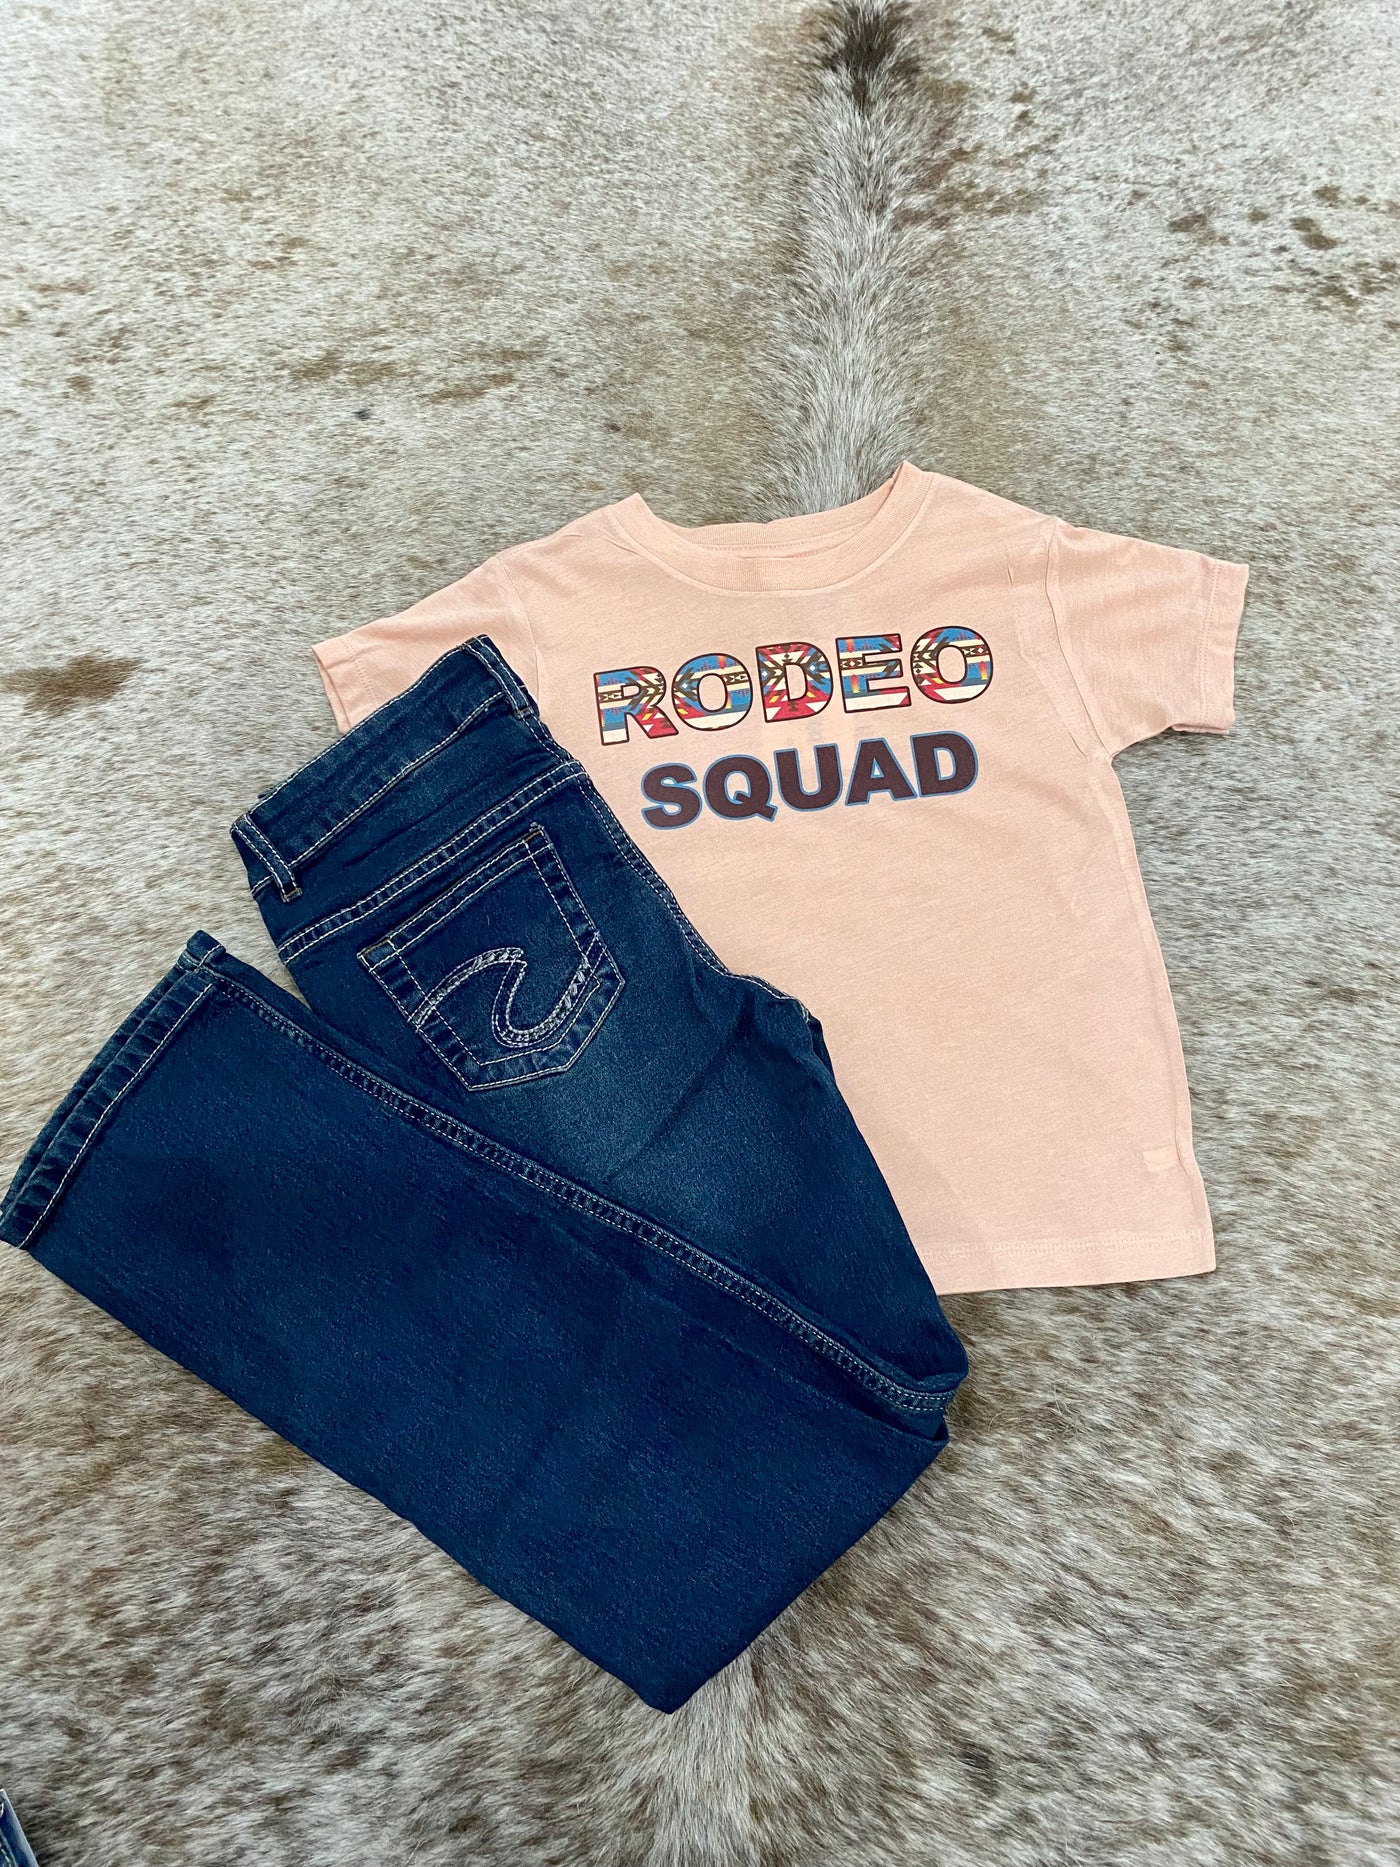 G3 Rodeo Squad Youth Tee